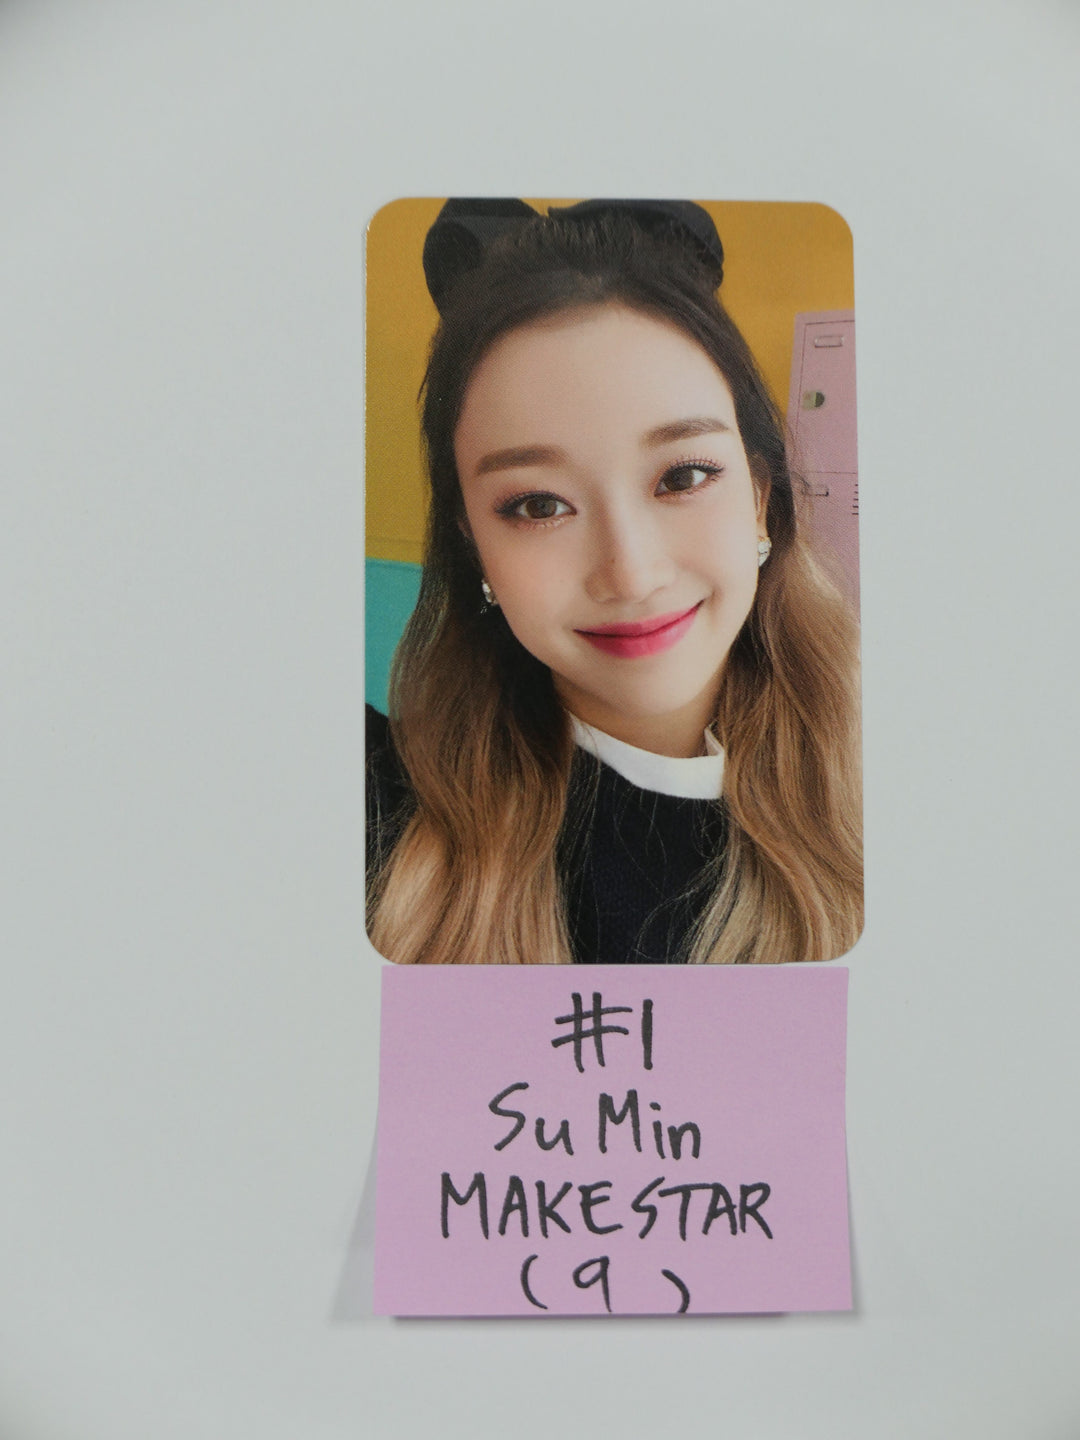 StayC 'So Bad' - Makestar Fansign Event Photocard